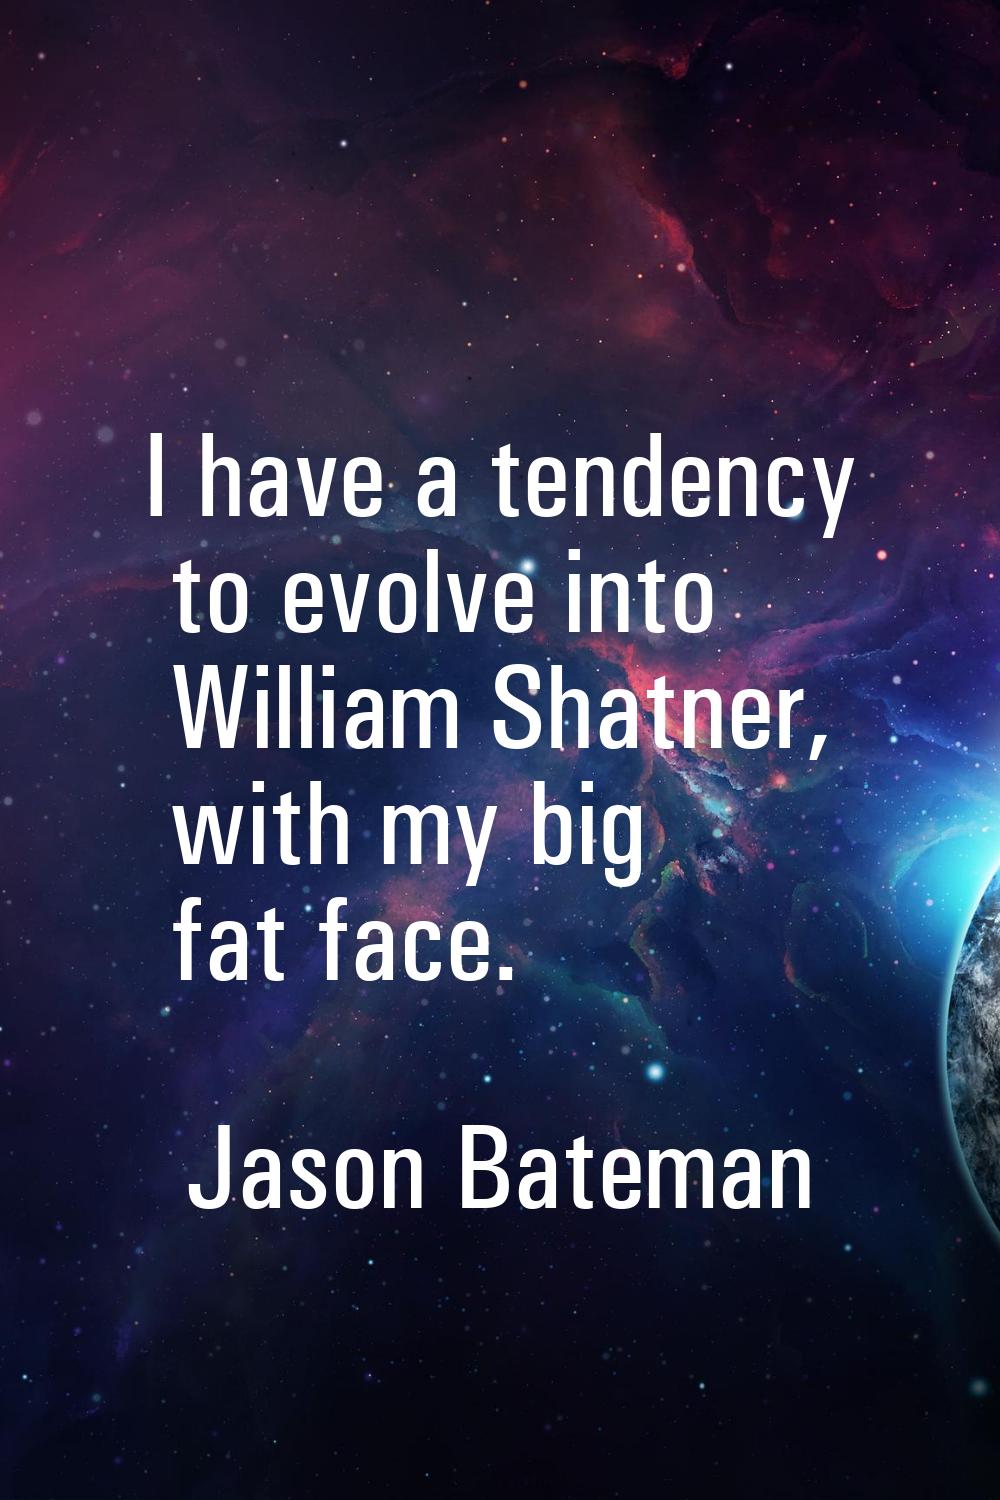 I have a tendency to evolve into William Shatner, with my big fat face.